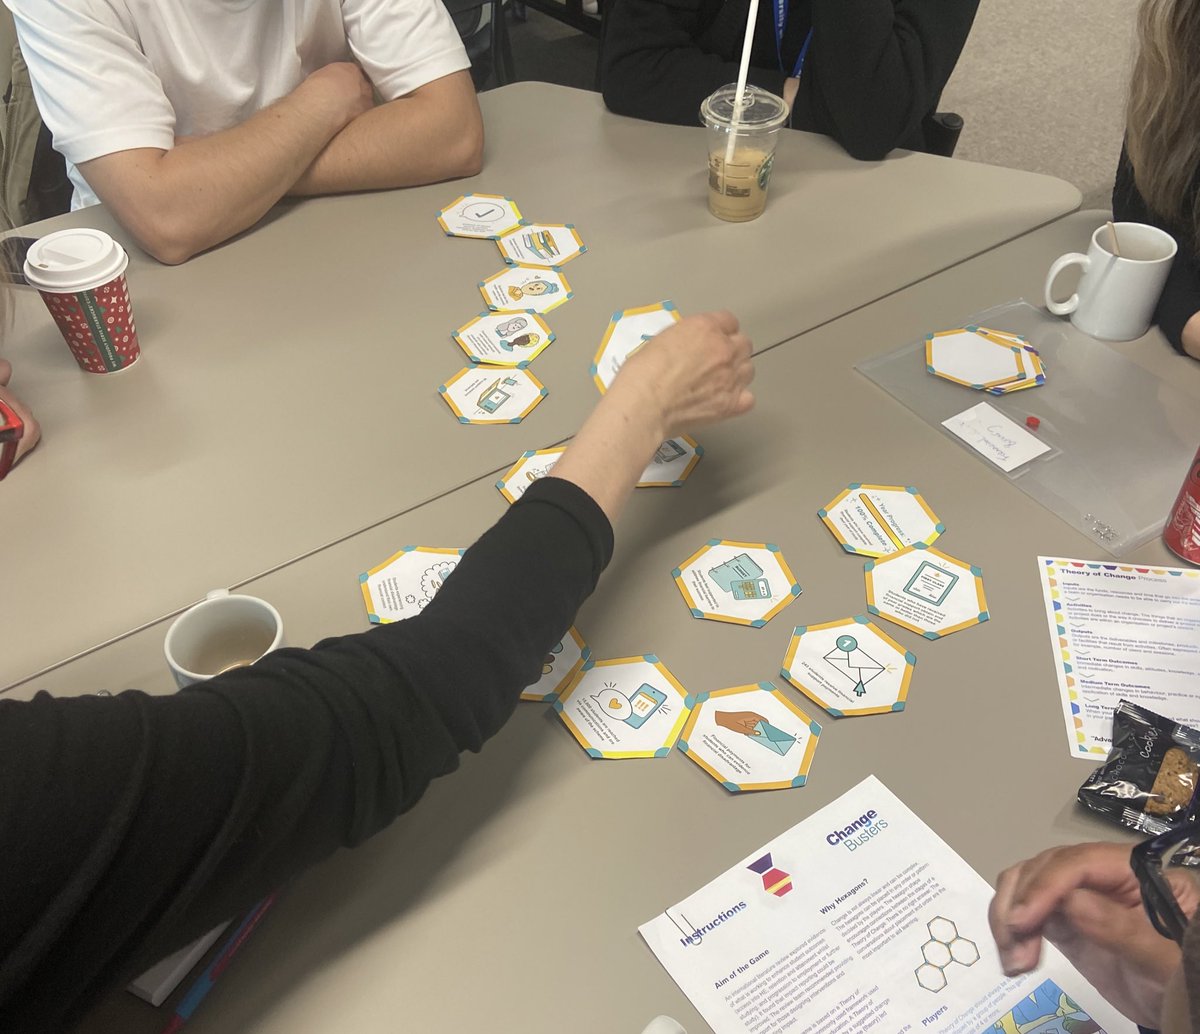 Had a really good @SUBrighton staff afternoon yesterday talking about planning and evaluation for 23/24. We played the @AdvanceHE #ChangeBusters game to get people thinking about #TheoryOfChange and planning evaluation from the start.

@lizaustenbooth @S_J_Norton @Nathaniel__P